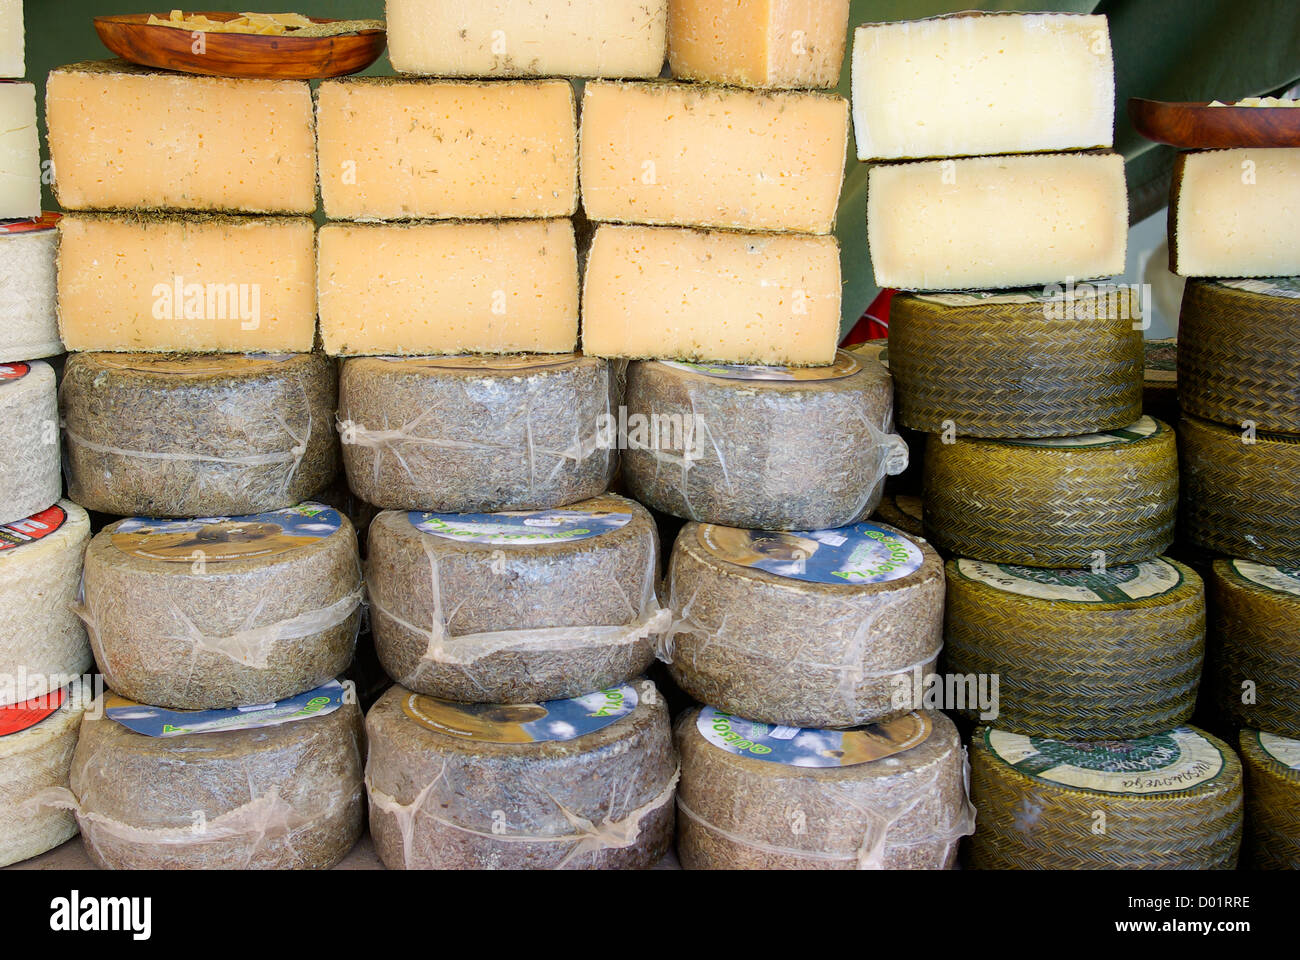 Blocks of cheese at a market in Calpe, Spain Stock Photo